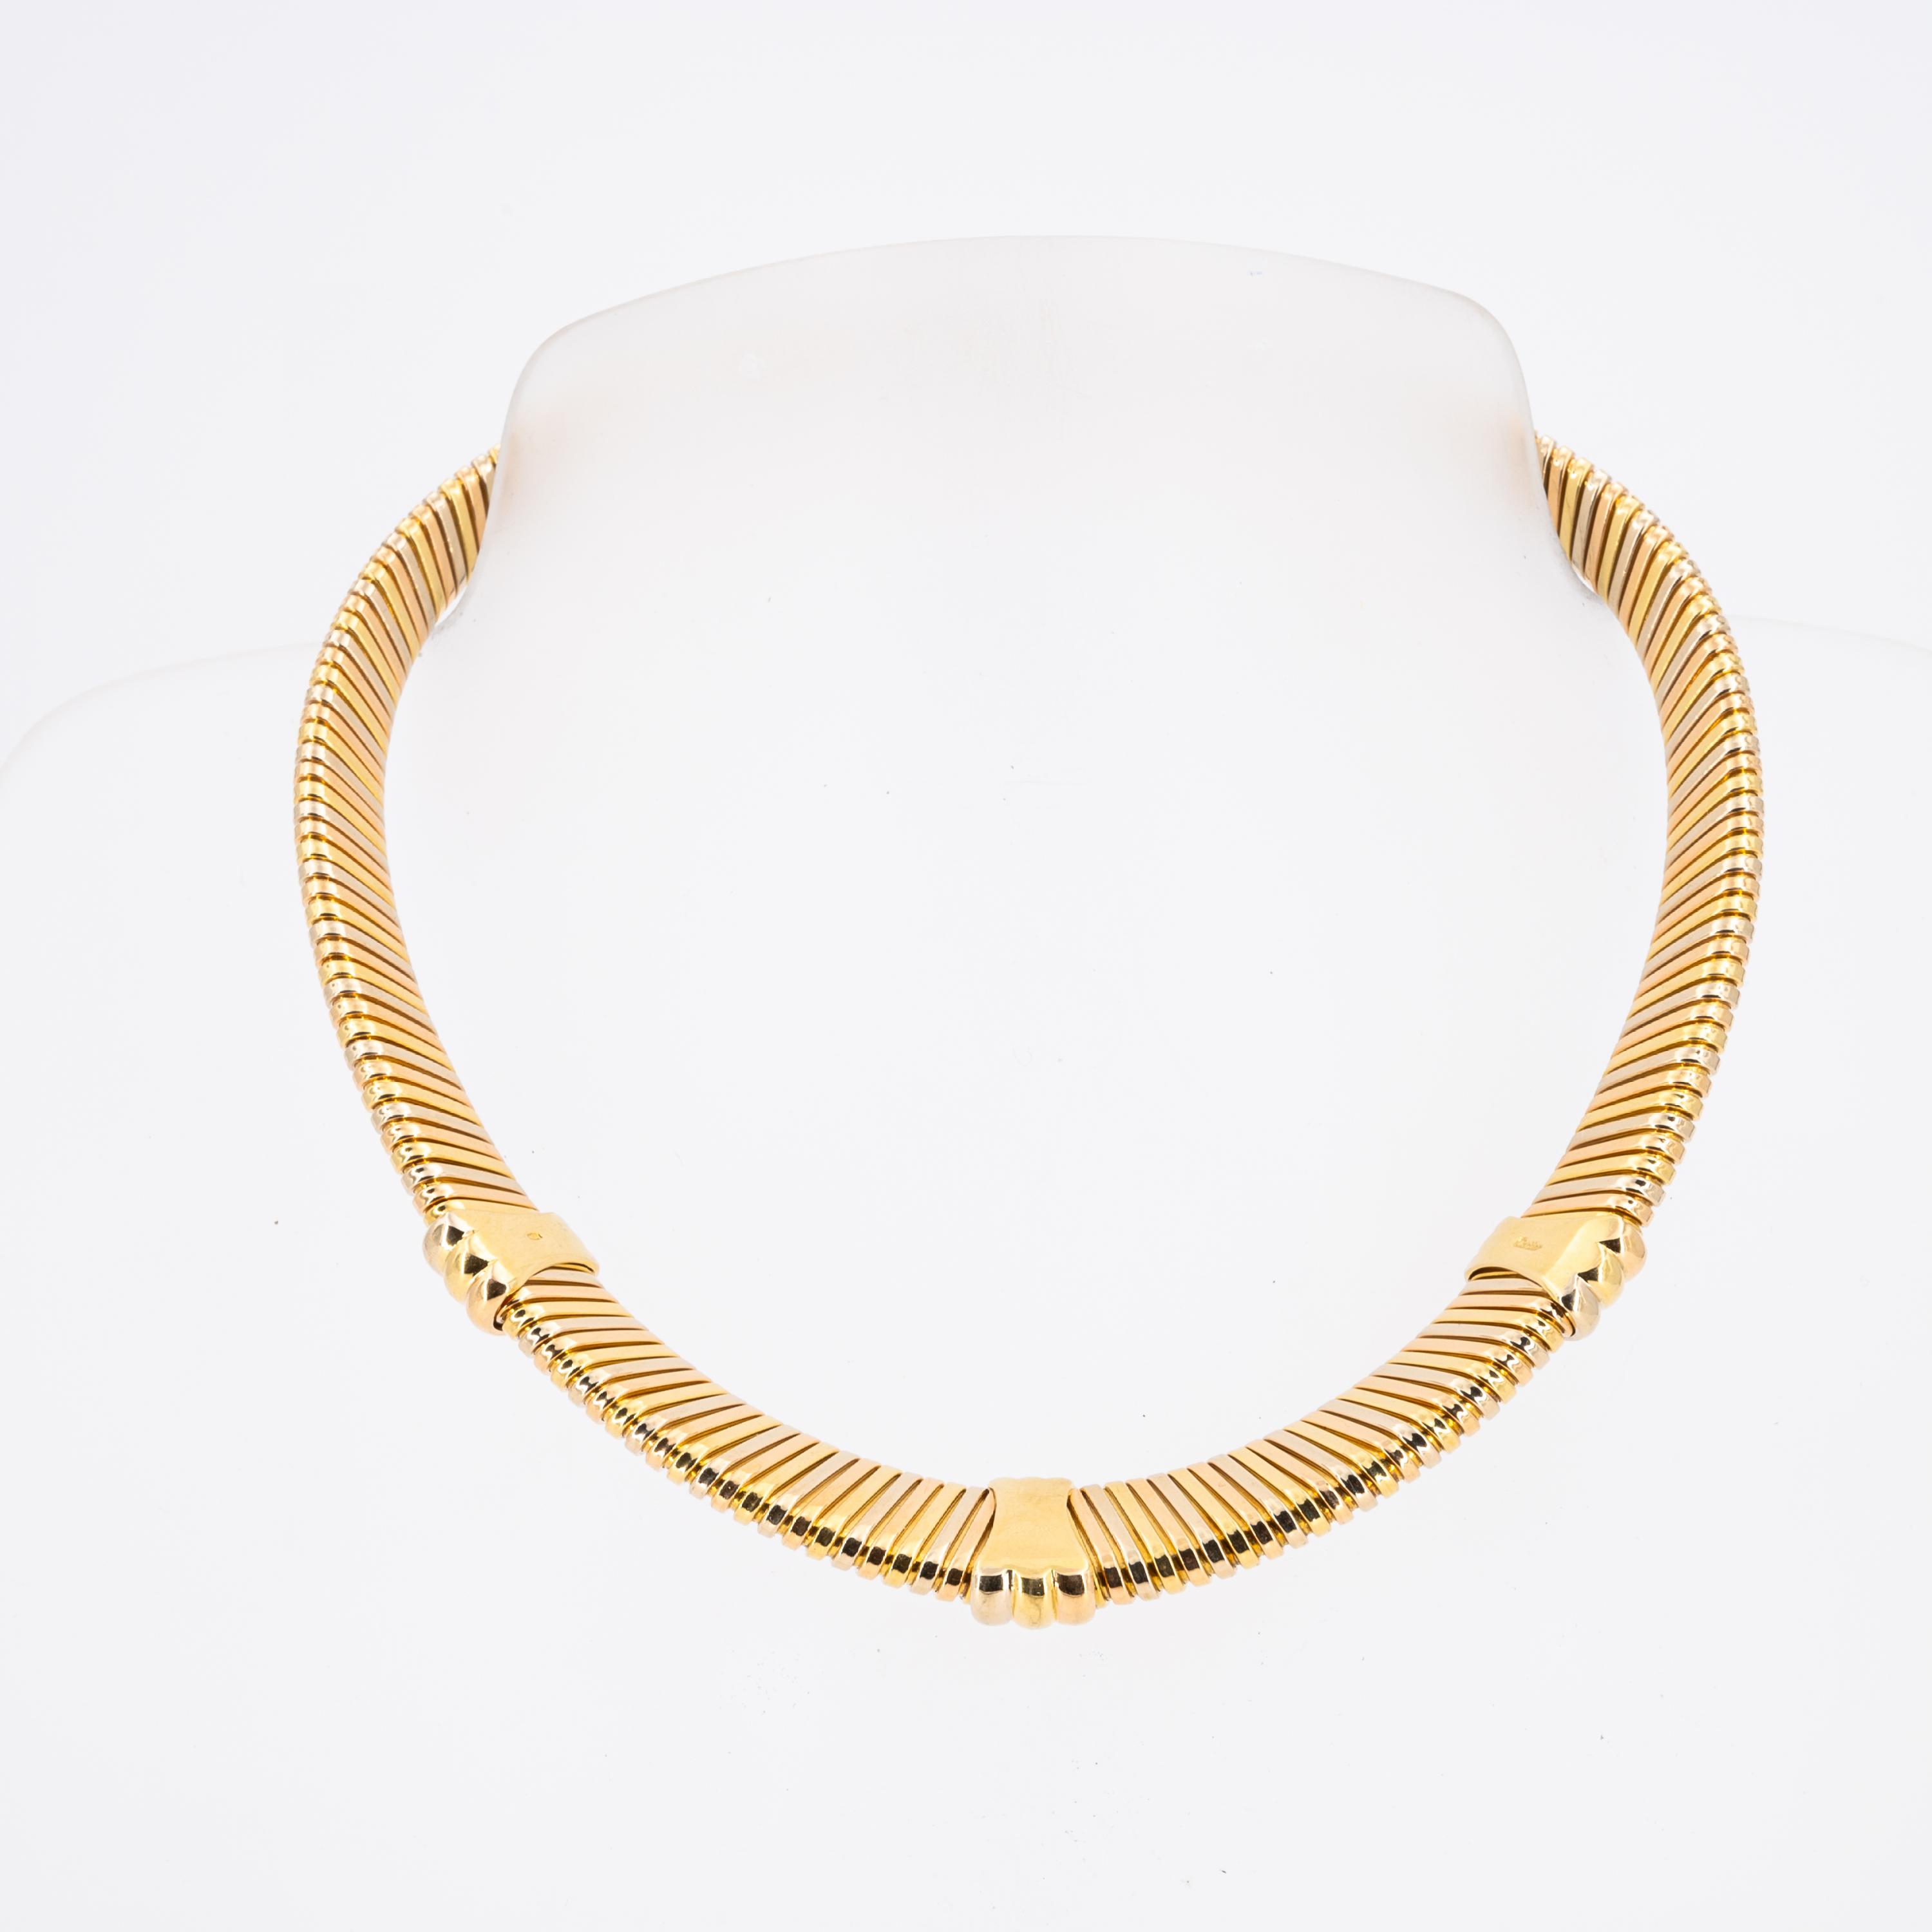 Cartier: Gold-Set: Necklace, Bracelet and Ear Studs/Clips - Image 2 of 9